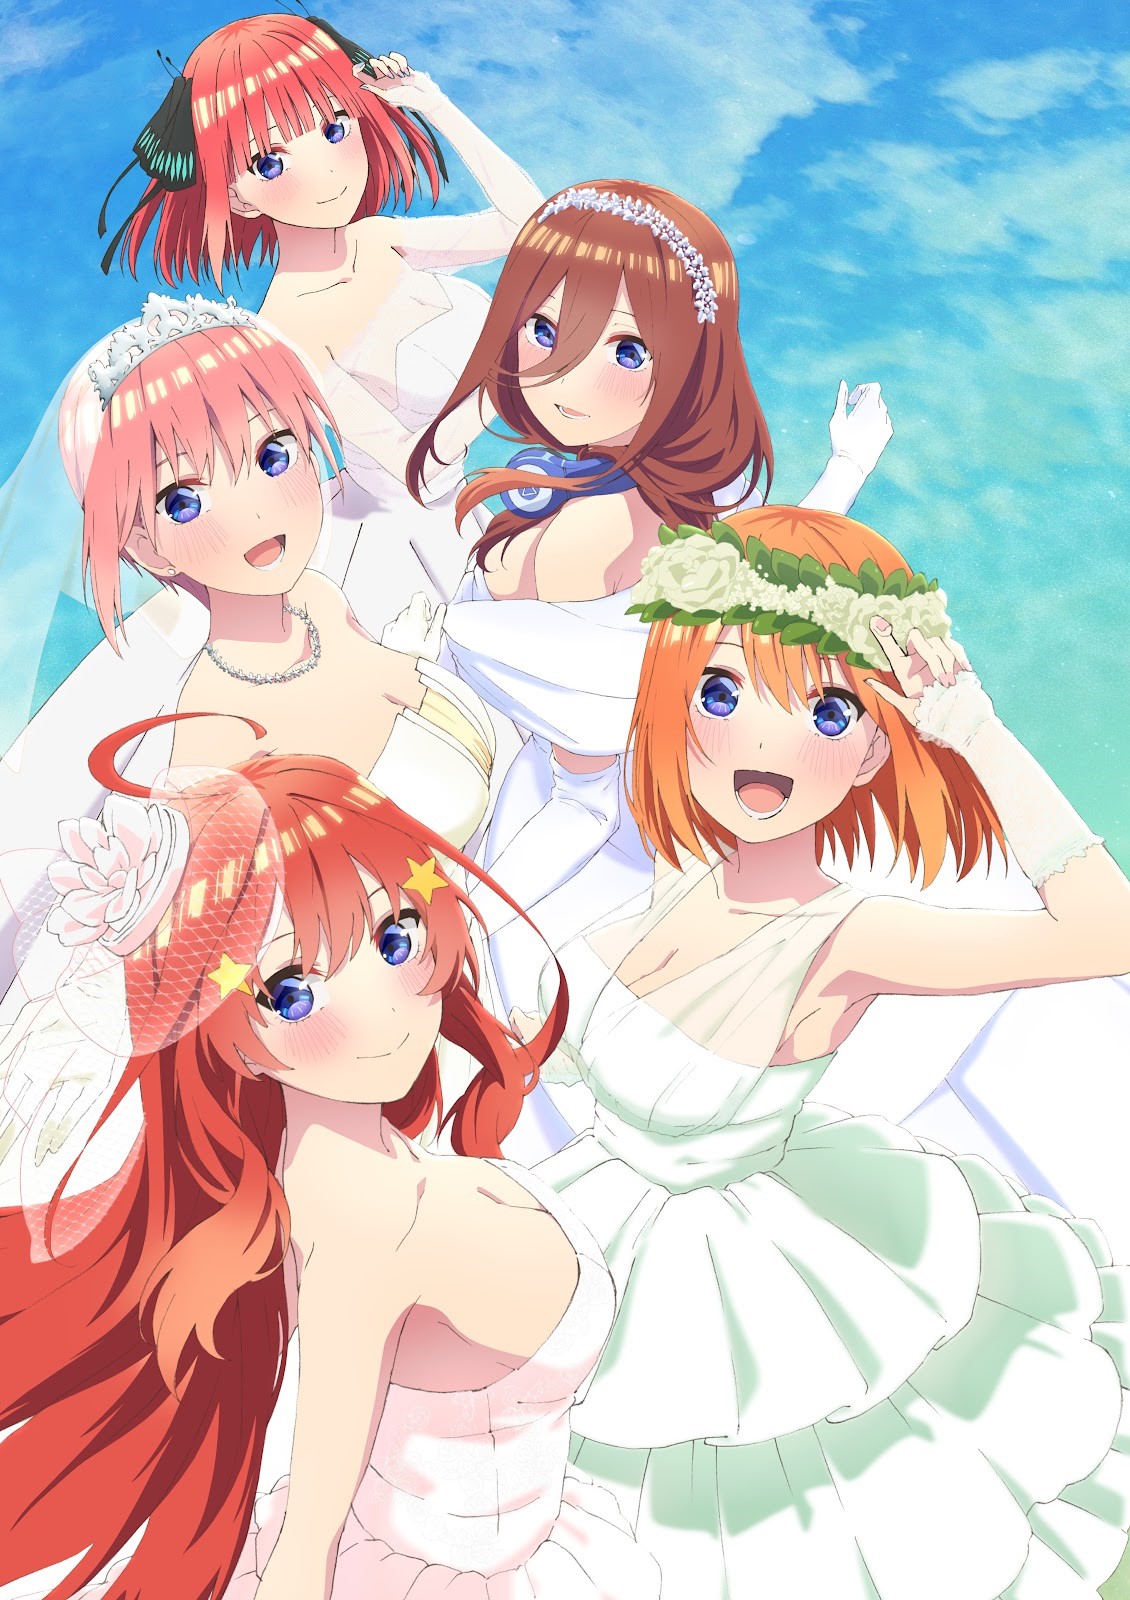 The Quintessential Quintuplets (Portuguese Dub) The Photo That Started It  All - Watch on Crunchyroll